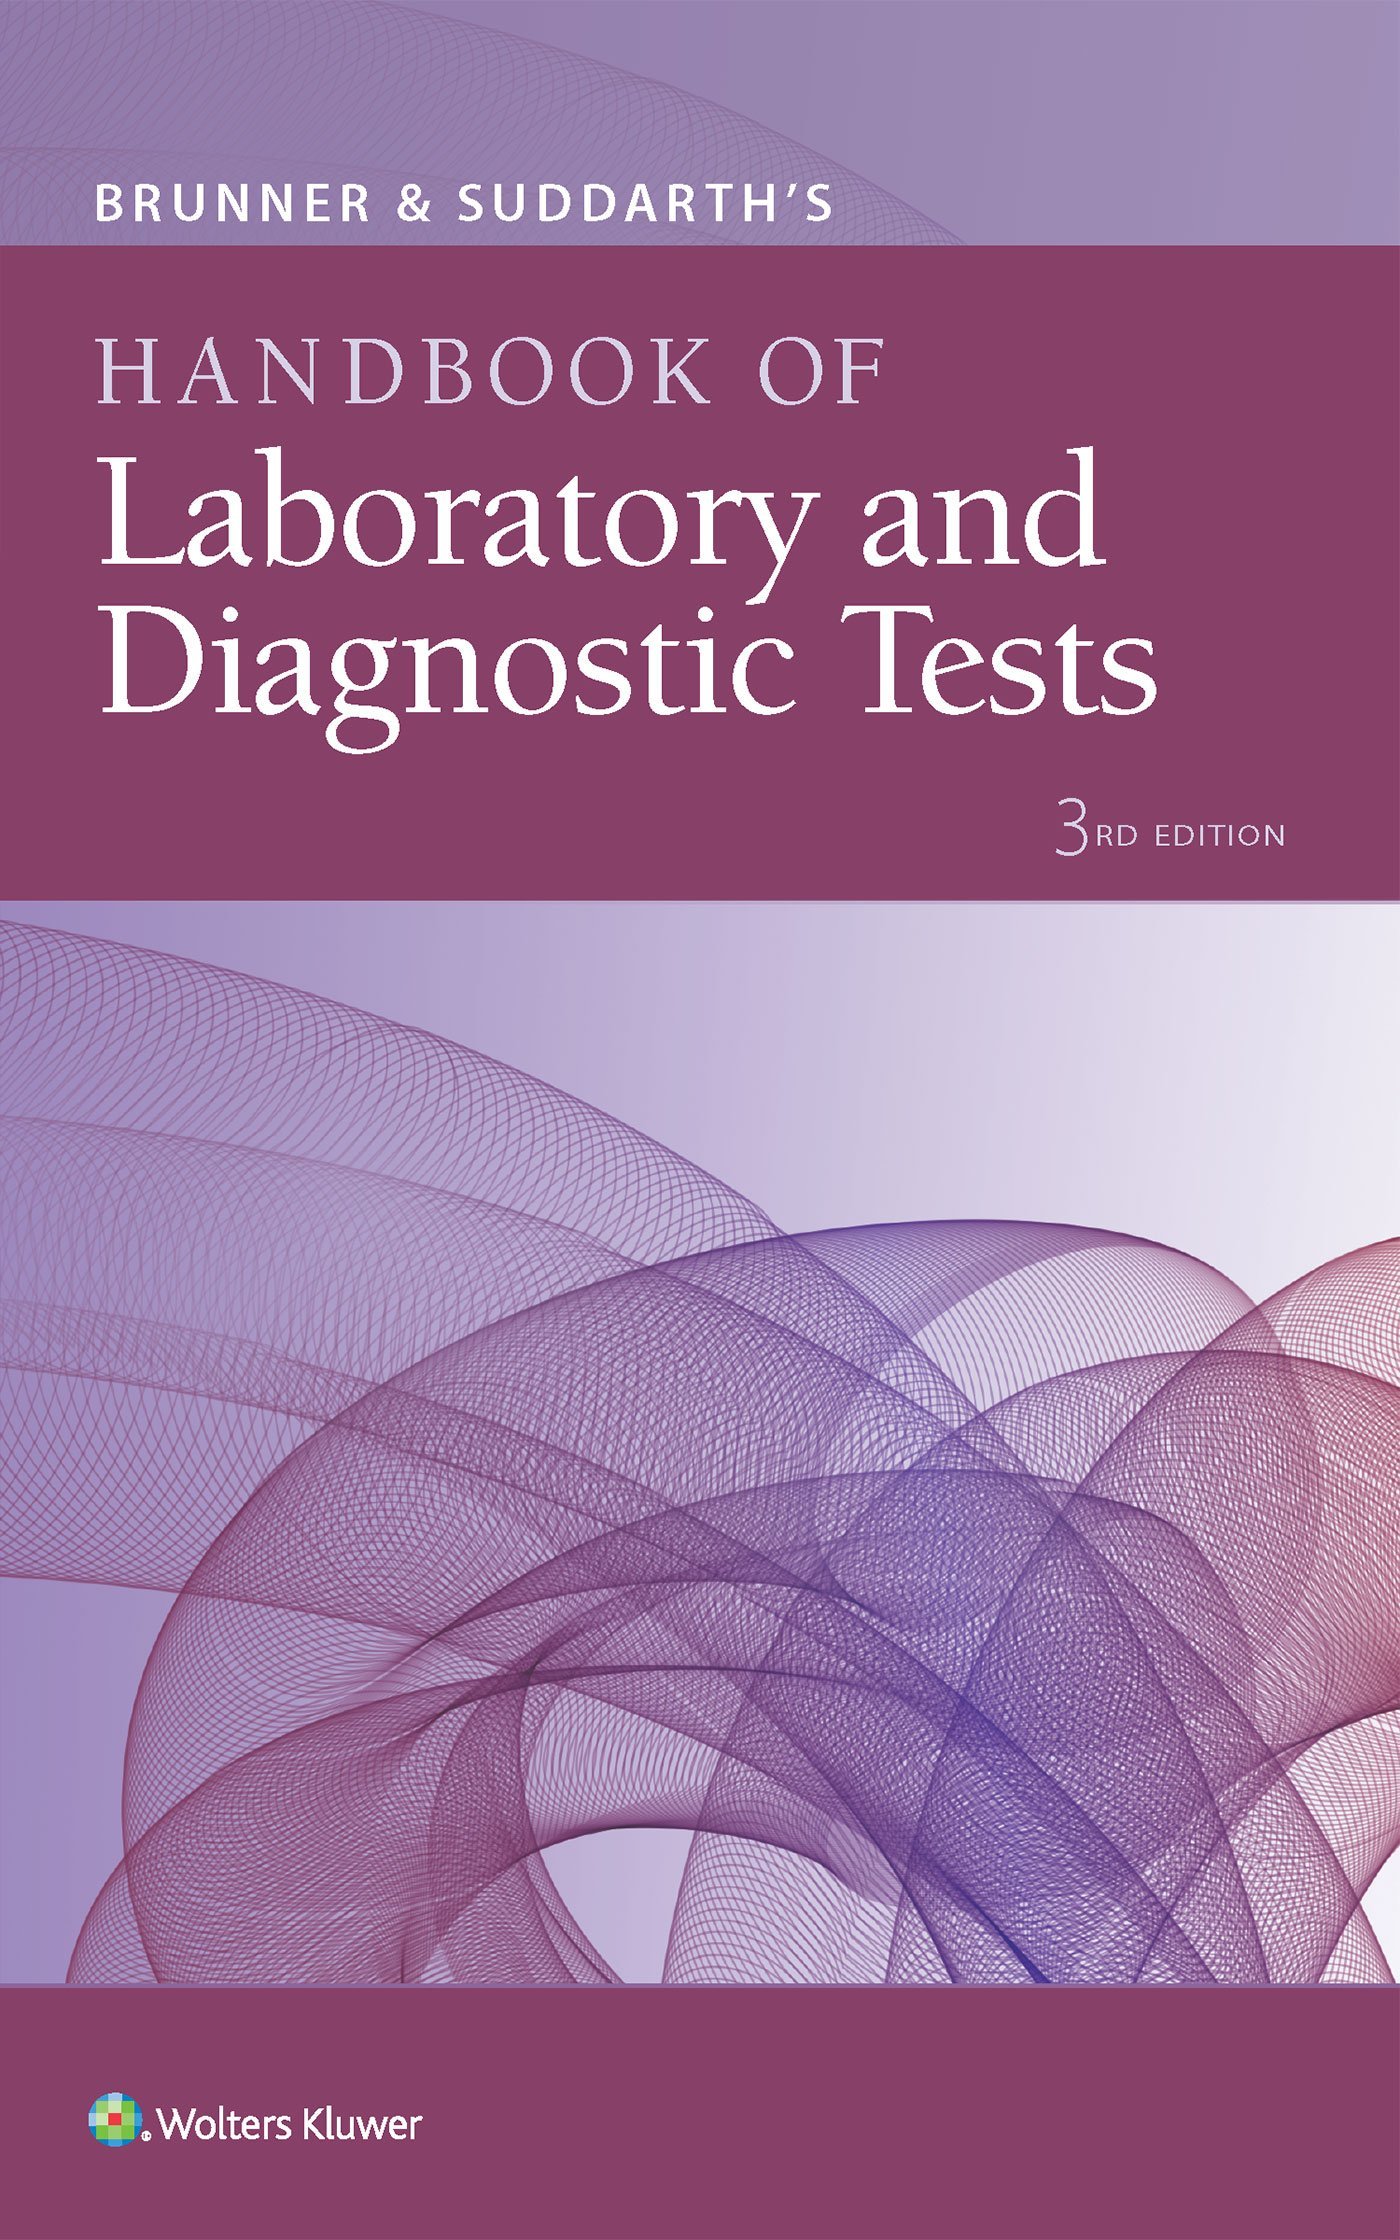 Book Cover Brunner & Suddarth's Handbook of Laboratory and Diagnostic Tests